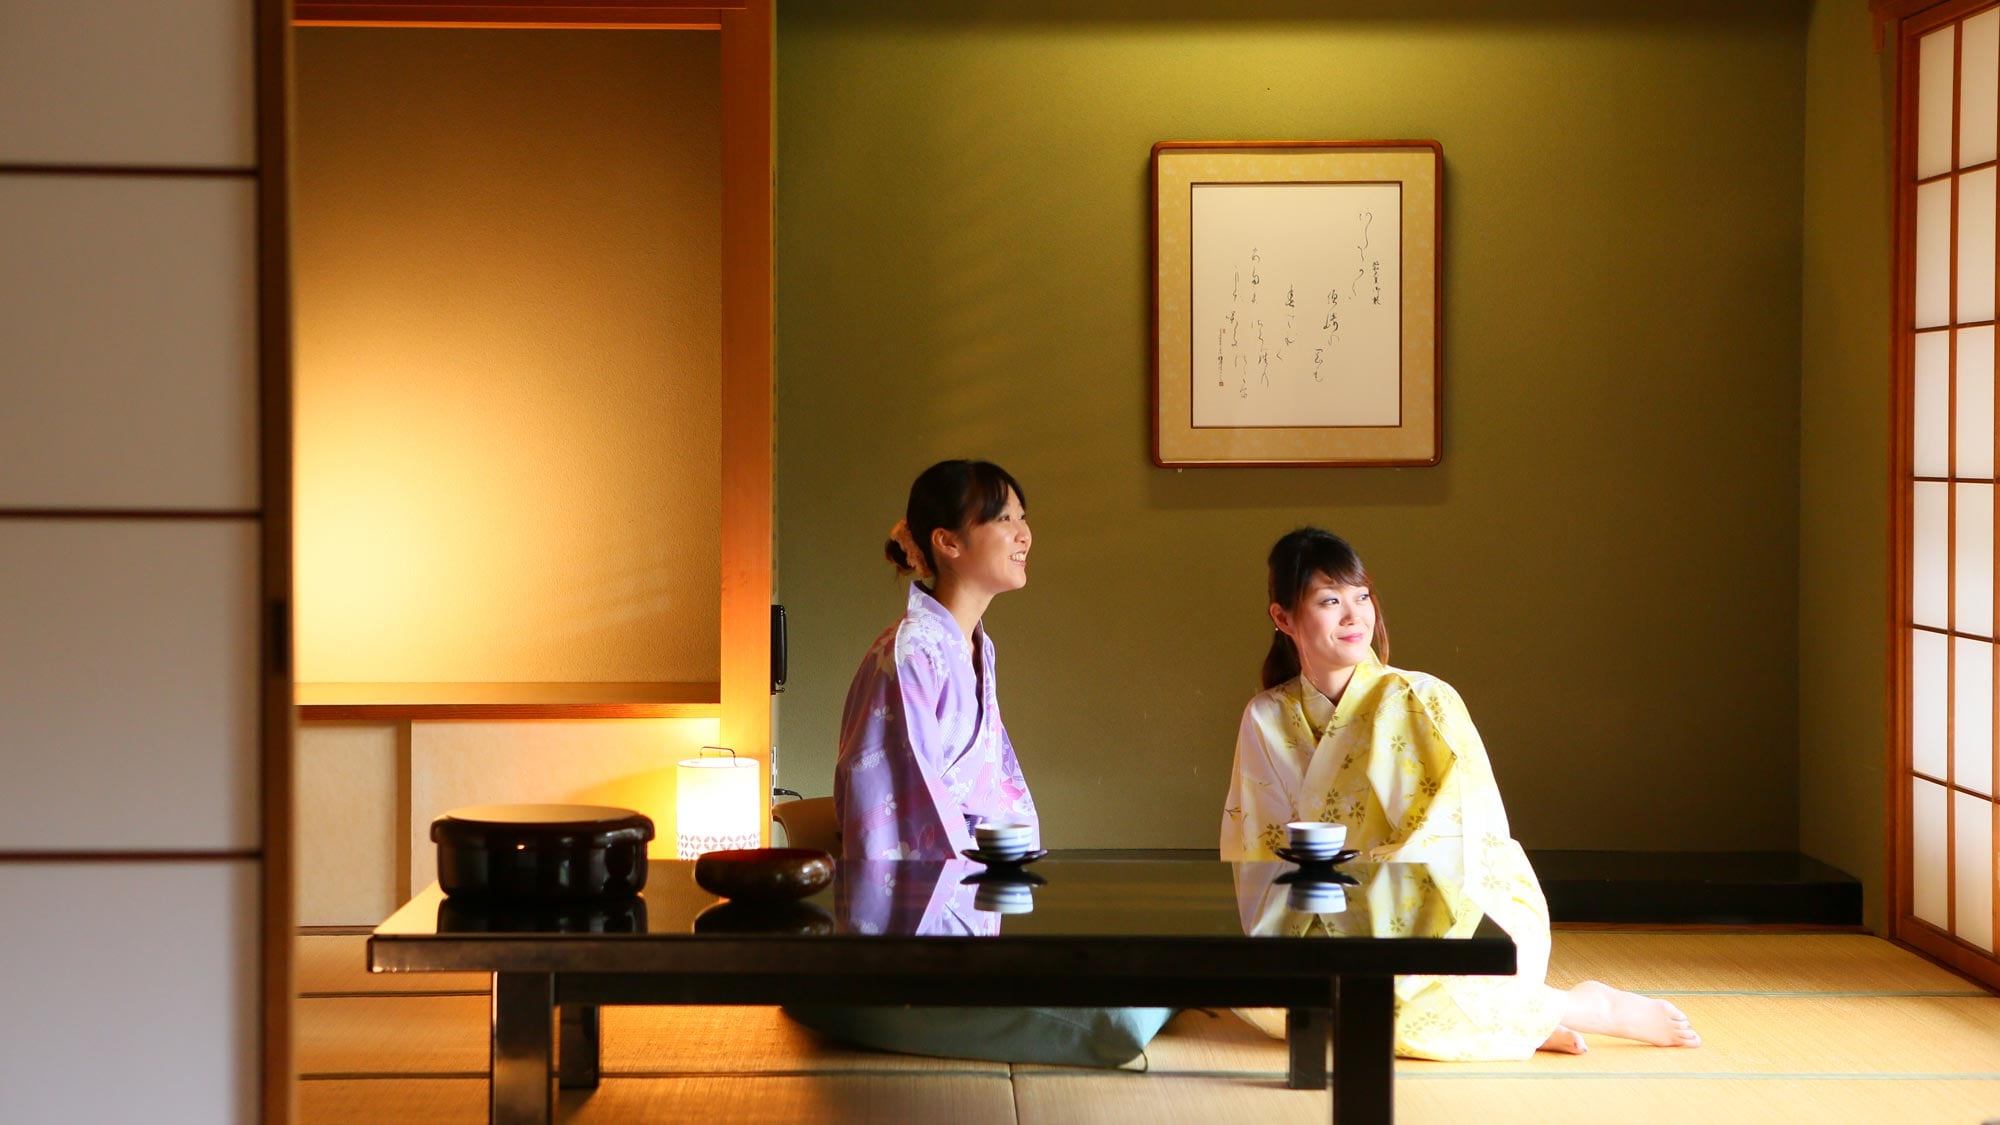 Higashiyama Onsen, the inner parlor of Aizu. Embraced by the mountains, relax and enjoy the hot springs♪